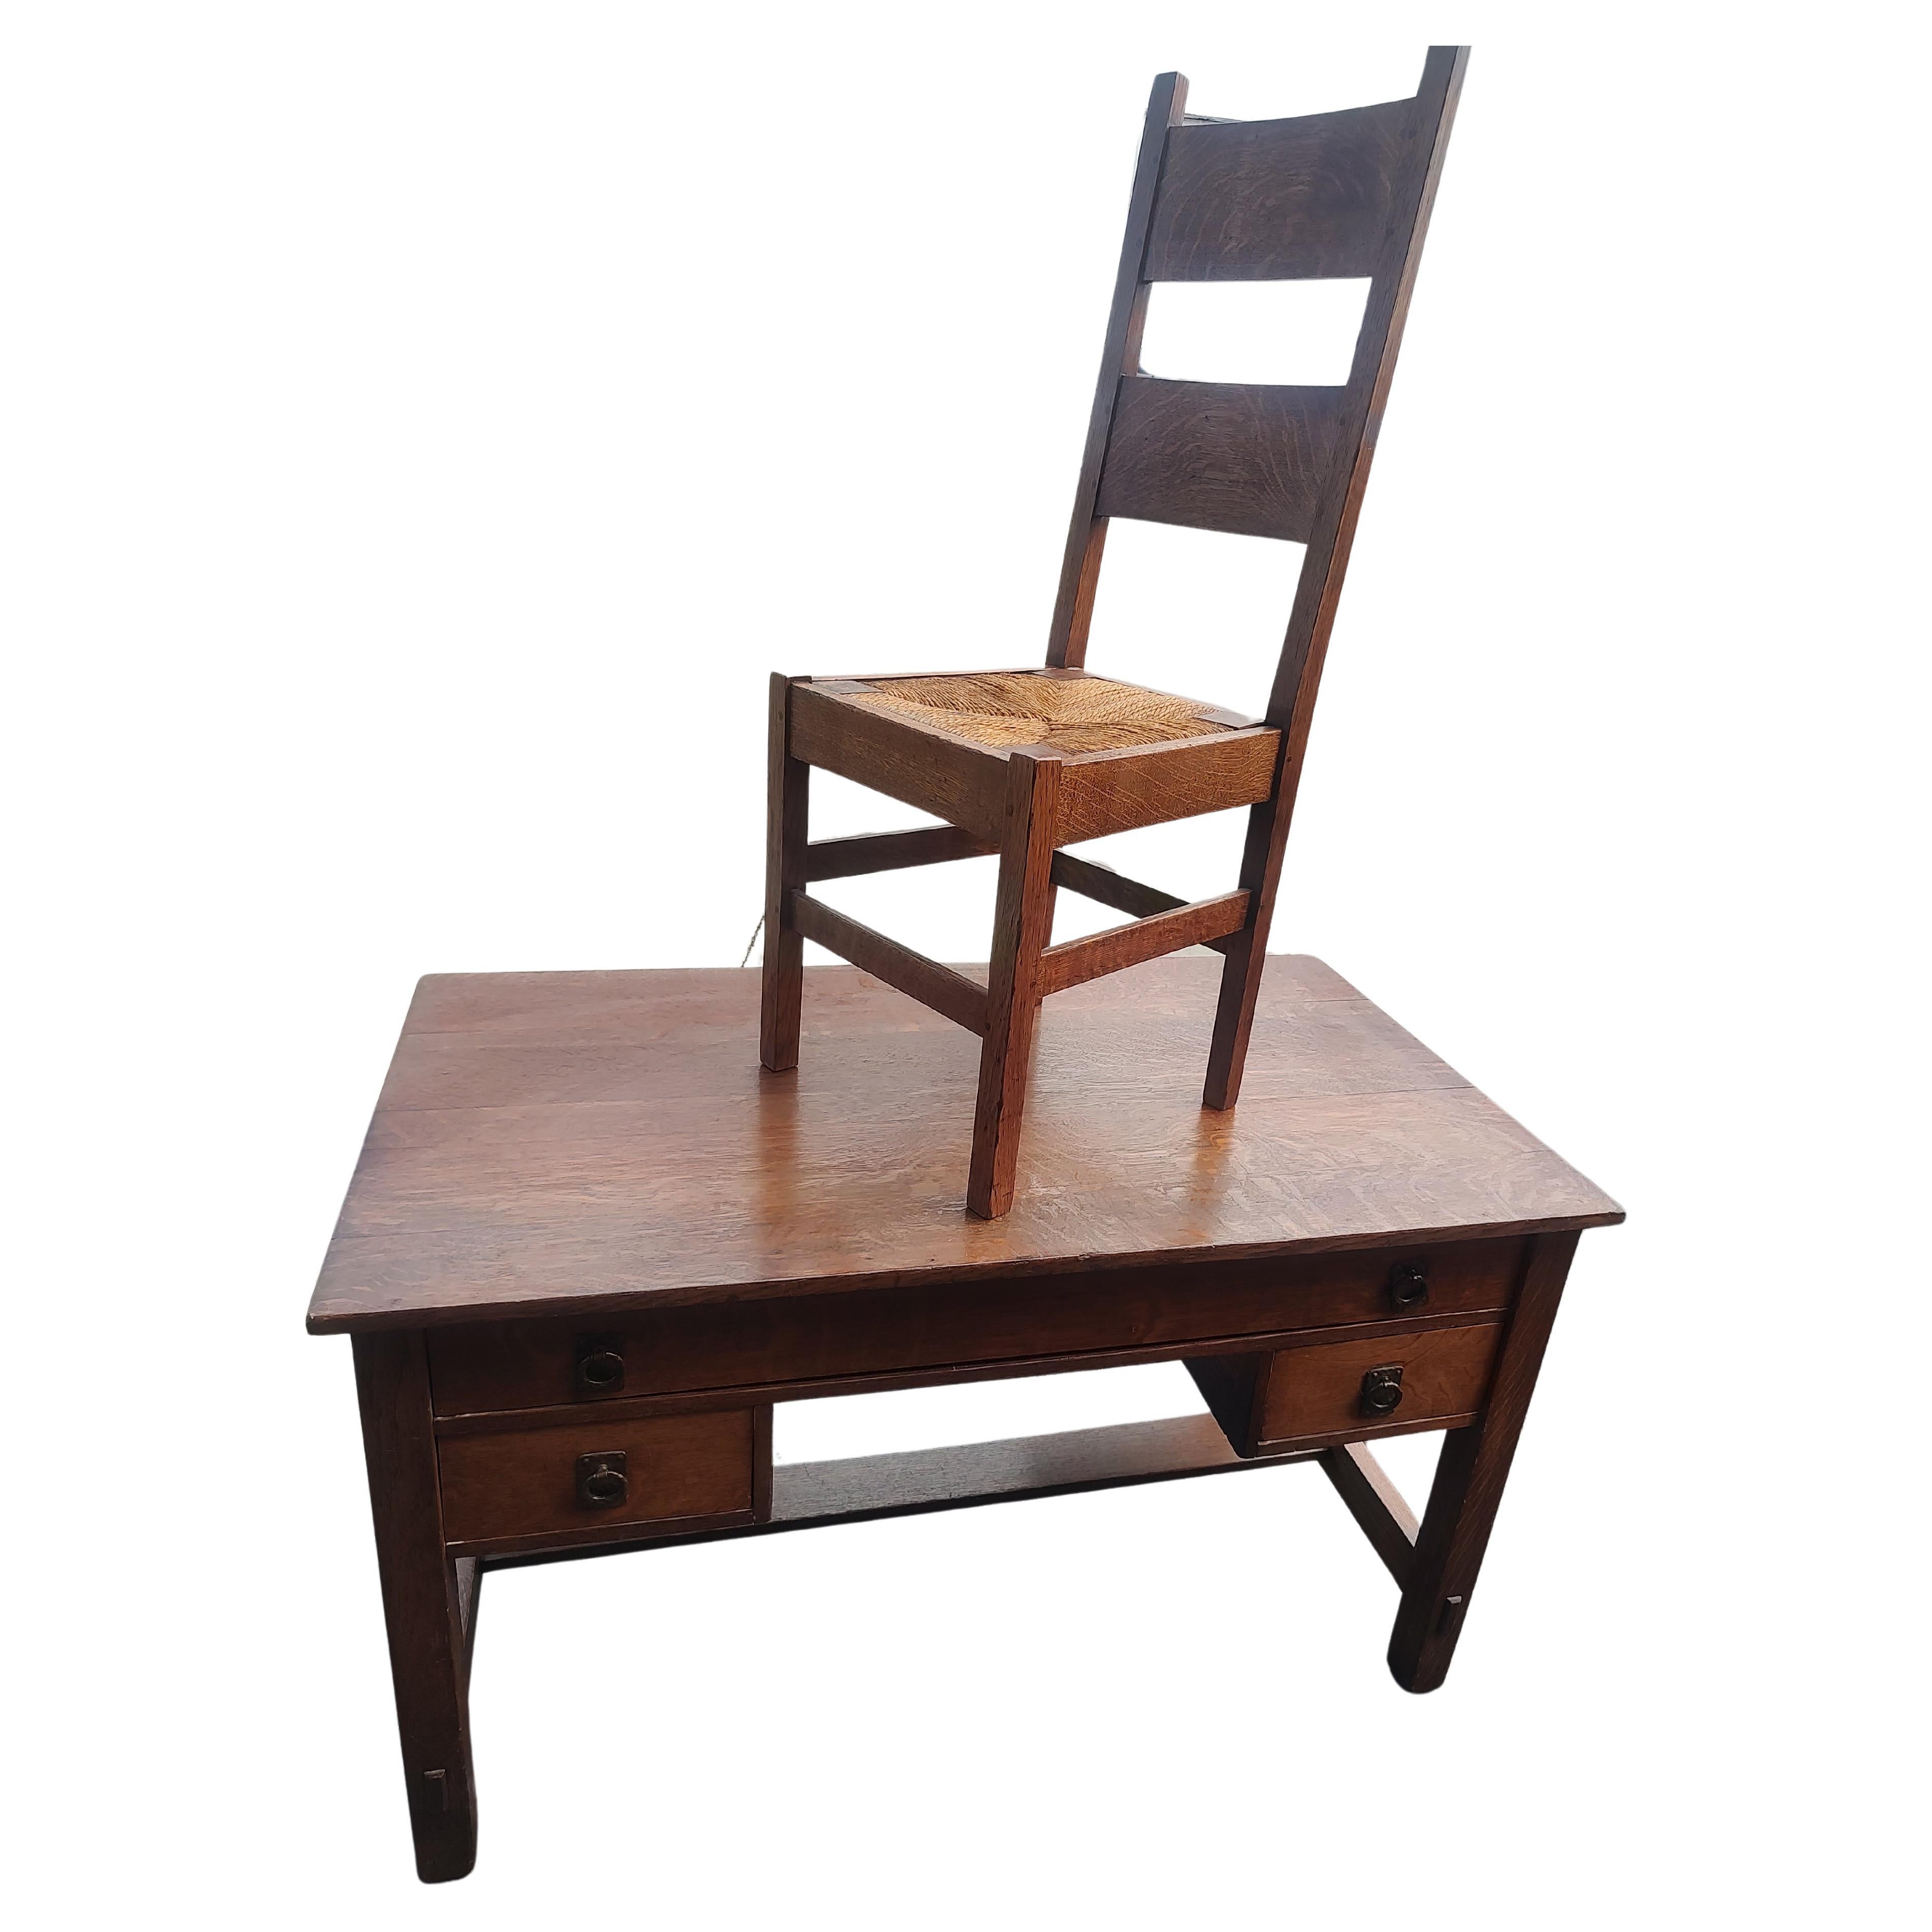 Iron Arts & Crafts Mission Oak 3 Drawer Desk & Chair with Rush Seat by Lifetime C1912 For Sale